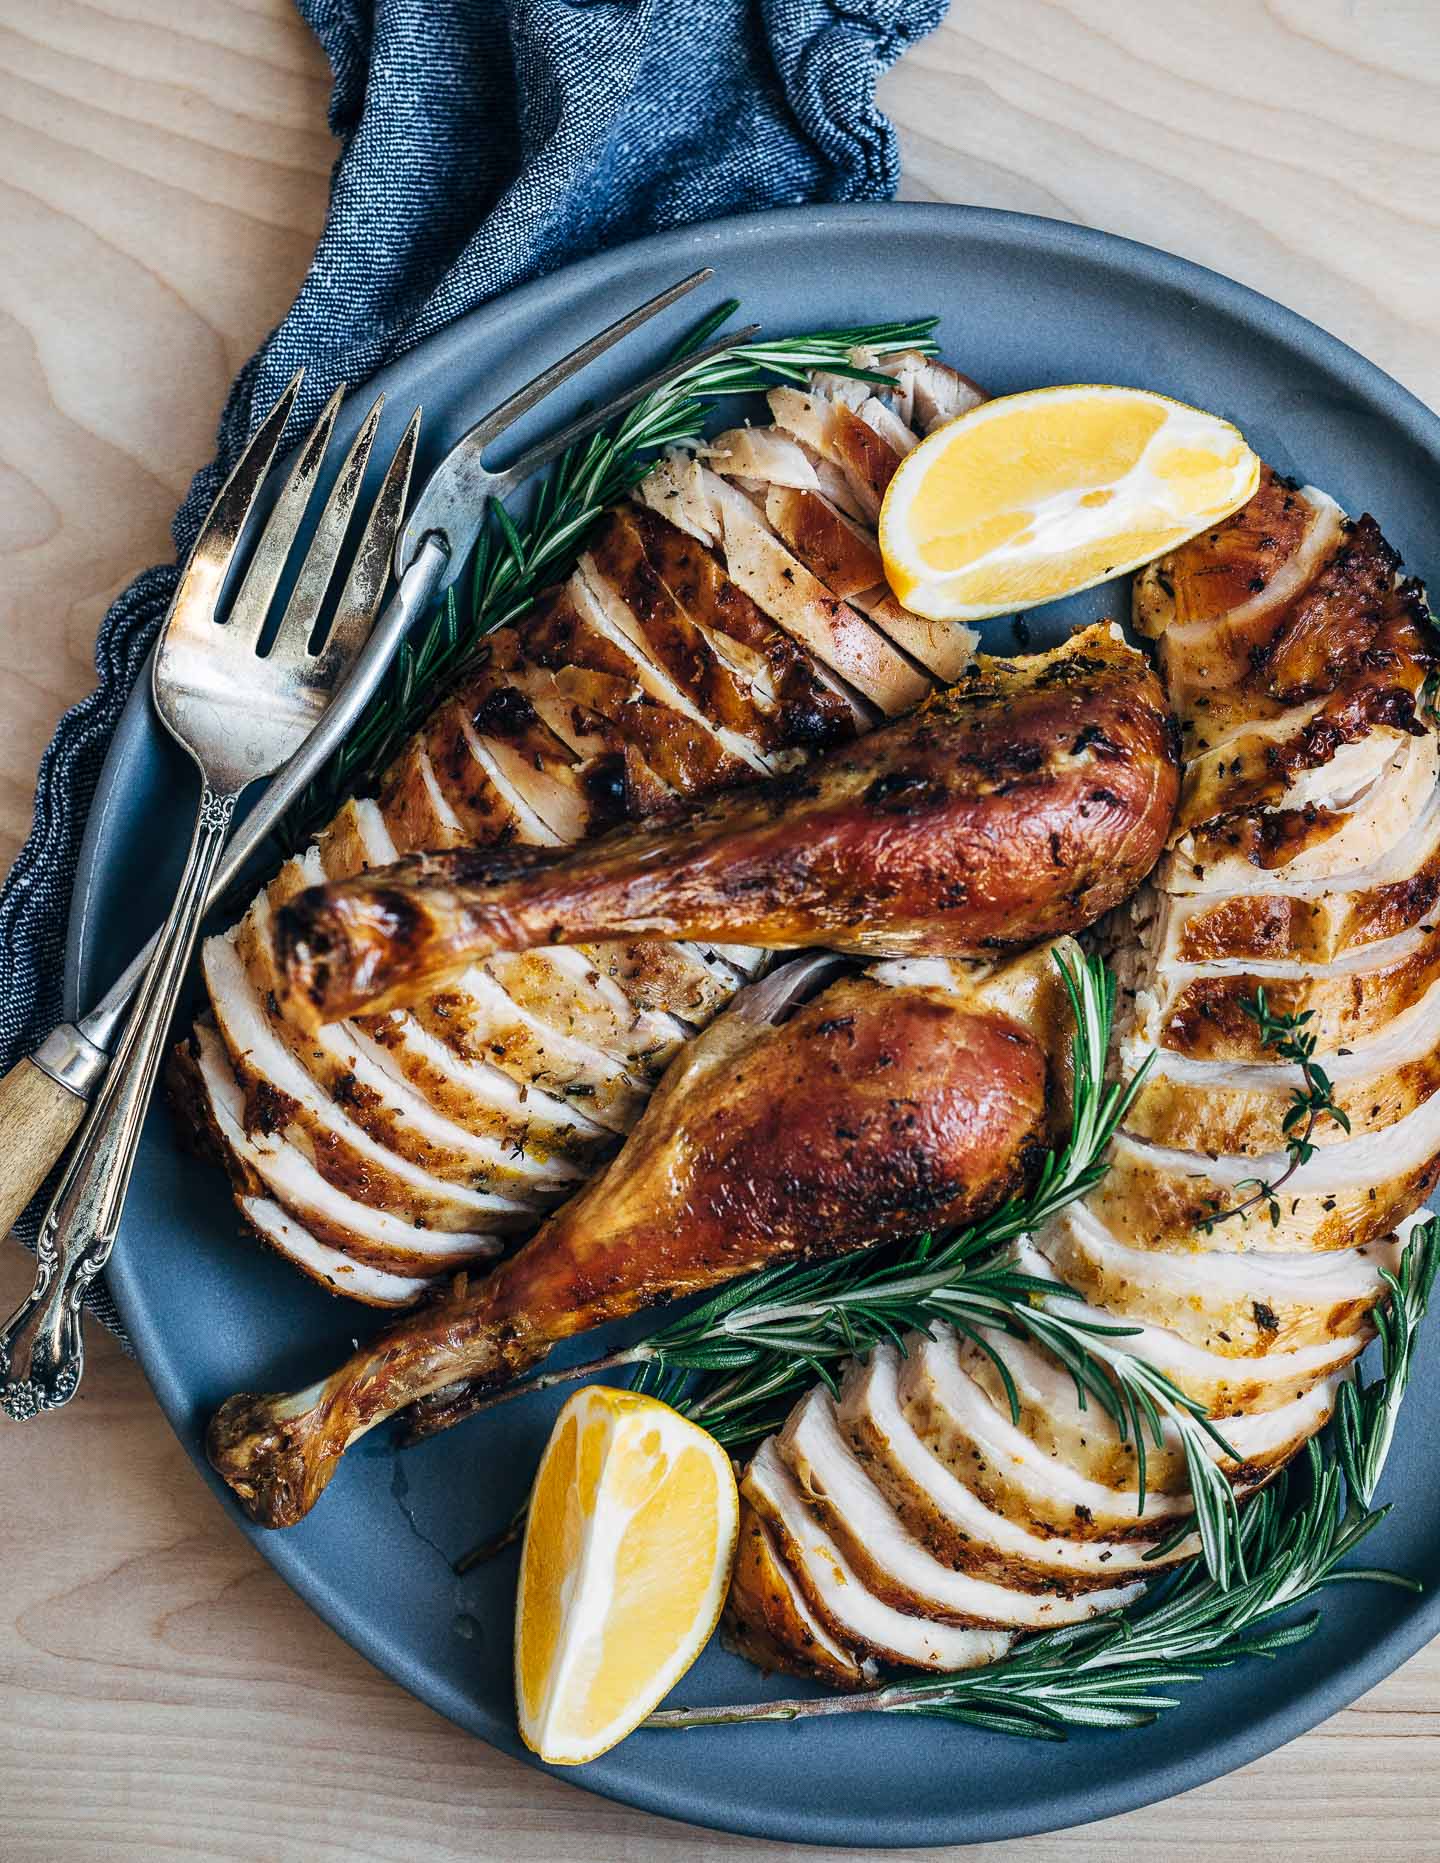 A sea salt, brown sugar, rosemary, and orange zest dry rub melds beautifully with the inherent flavor of an organic, free range broad breasted bronze turkey. This rosemary-orange roast turkey comes out of the oven with crisp, golden skin and suburb flavor.